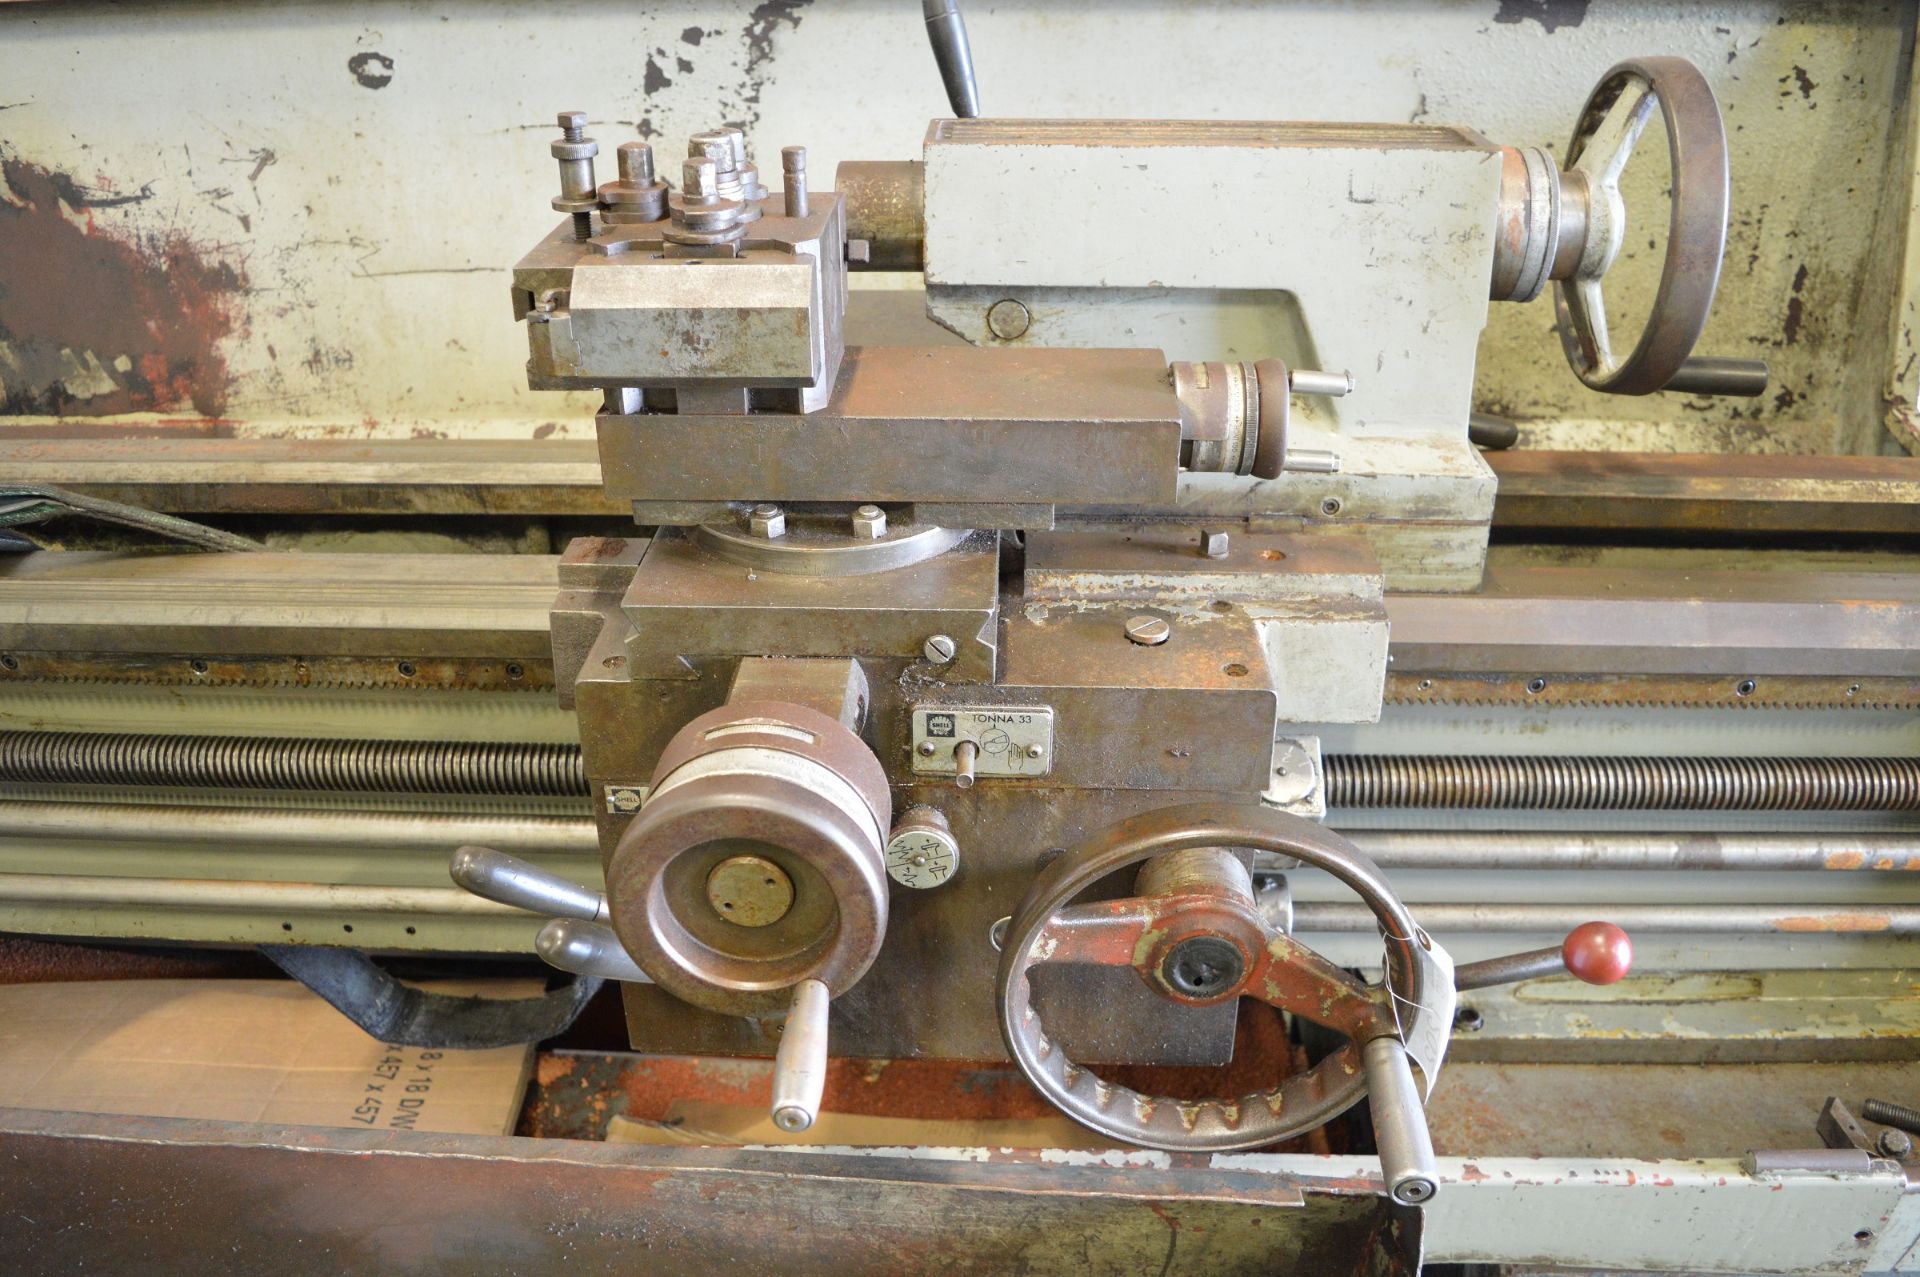 Colchester Mascot 1600 Lathe - Serial Number 7/0006/07853 - Image 6 of 16